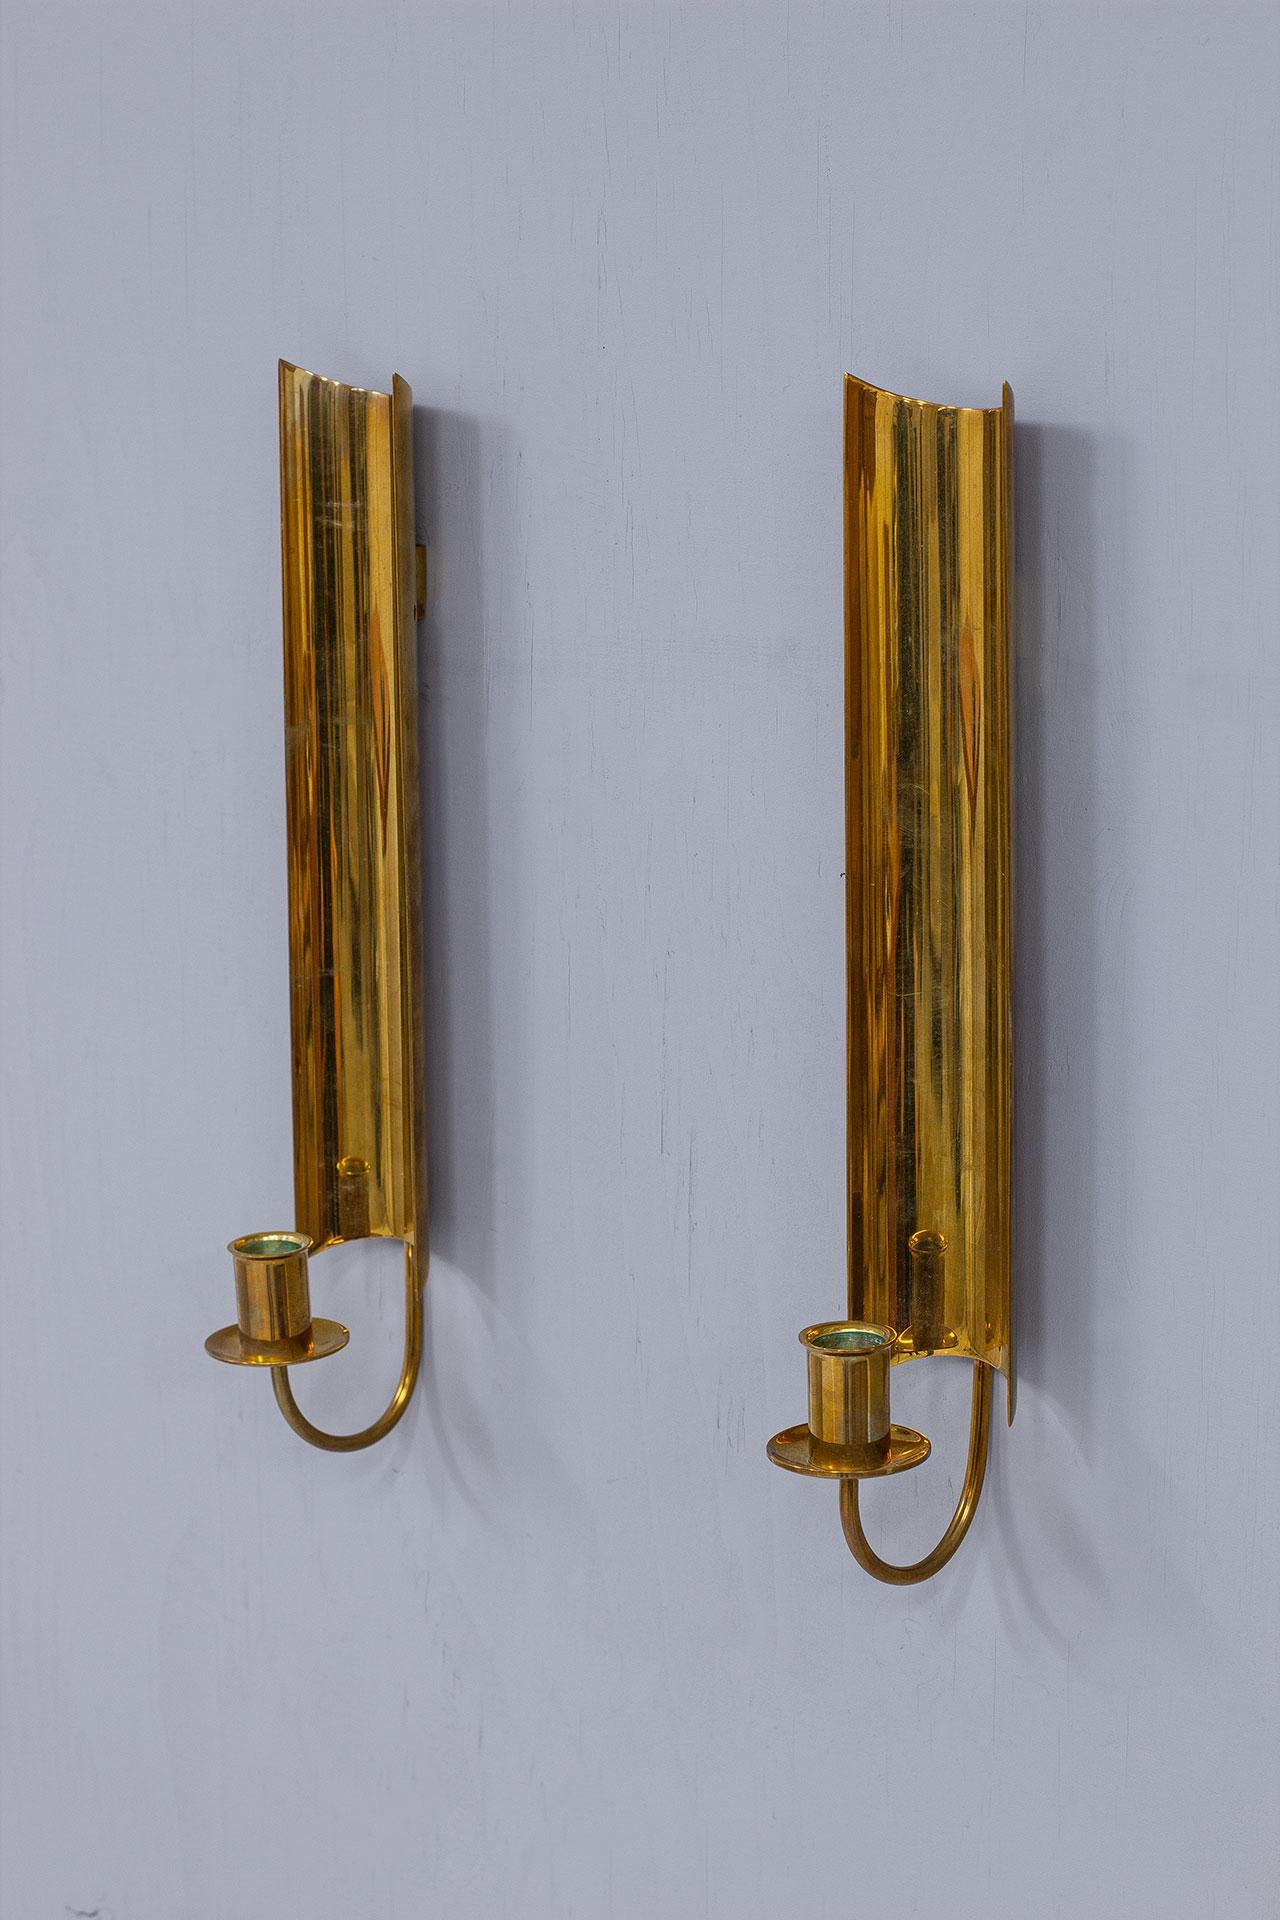 Swedish Vintage Pair of Brass Wall Candlesticks, Reflex by Pierre Forssell for Skultuna